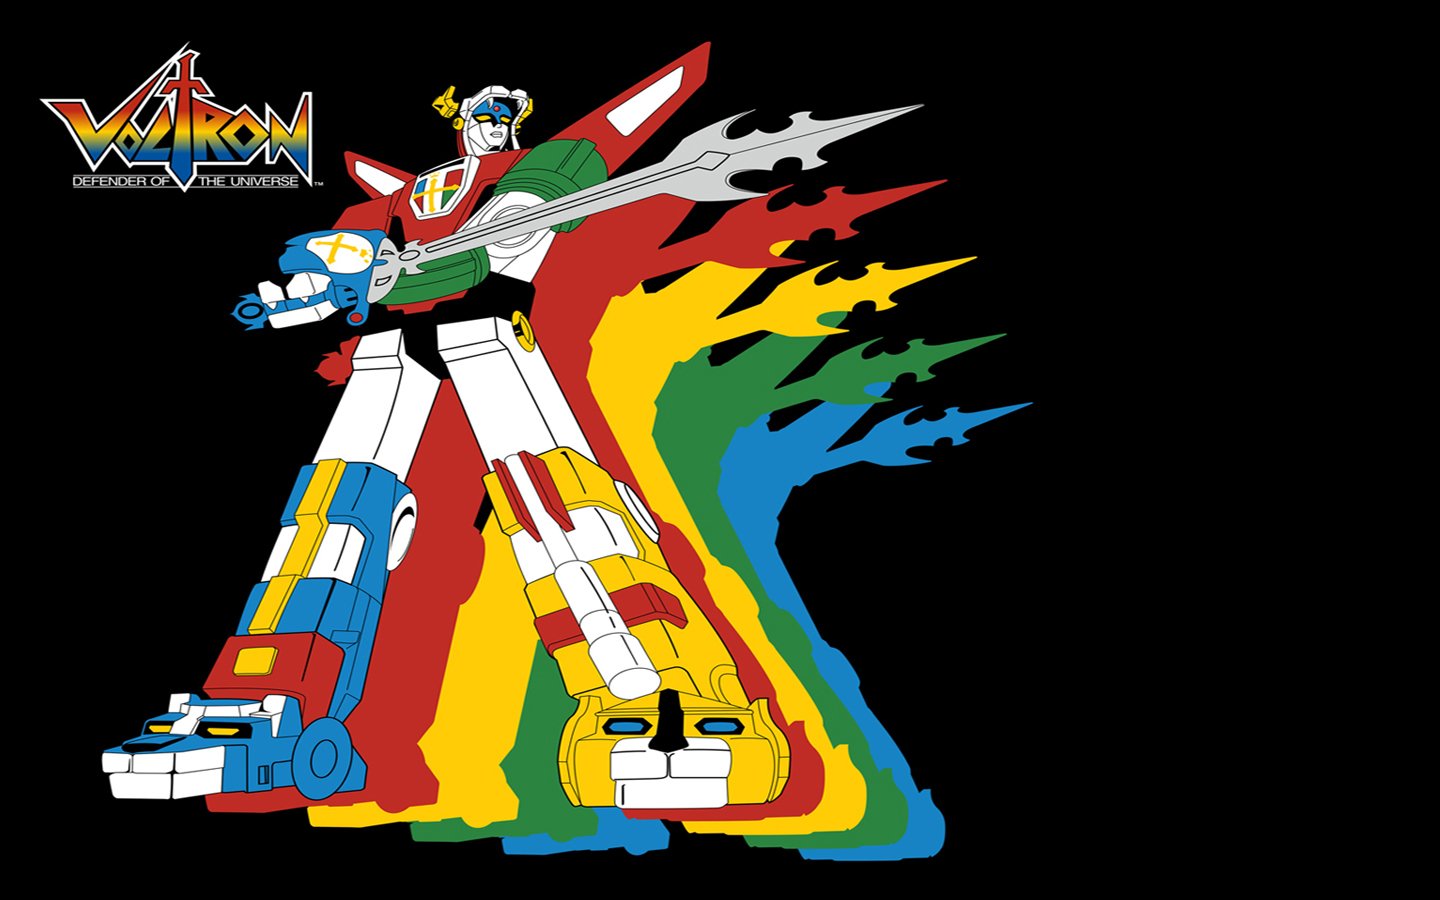 Voltron Defender Of The Universe #4